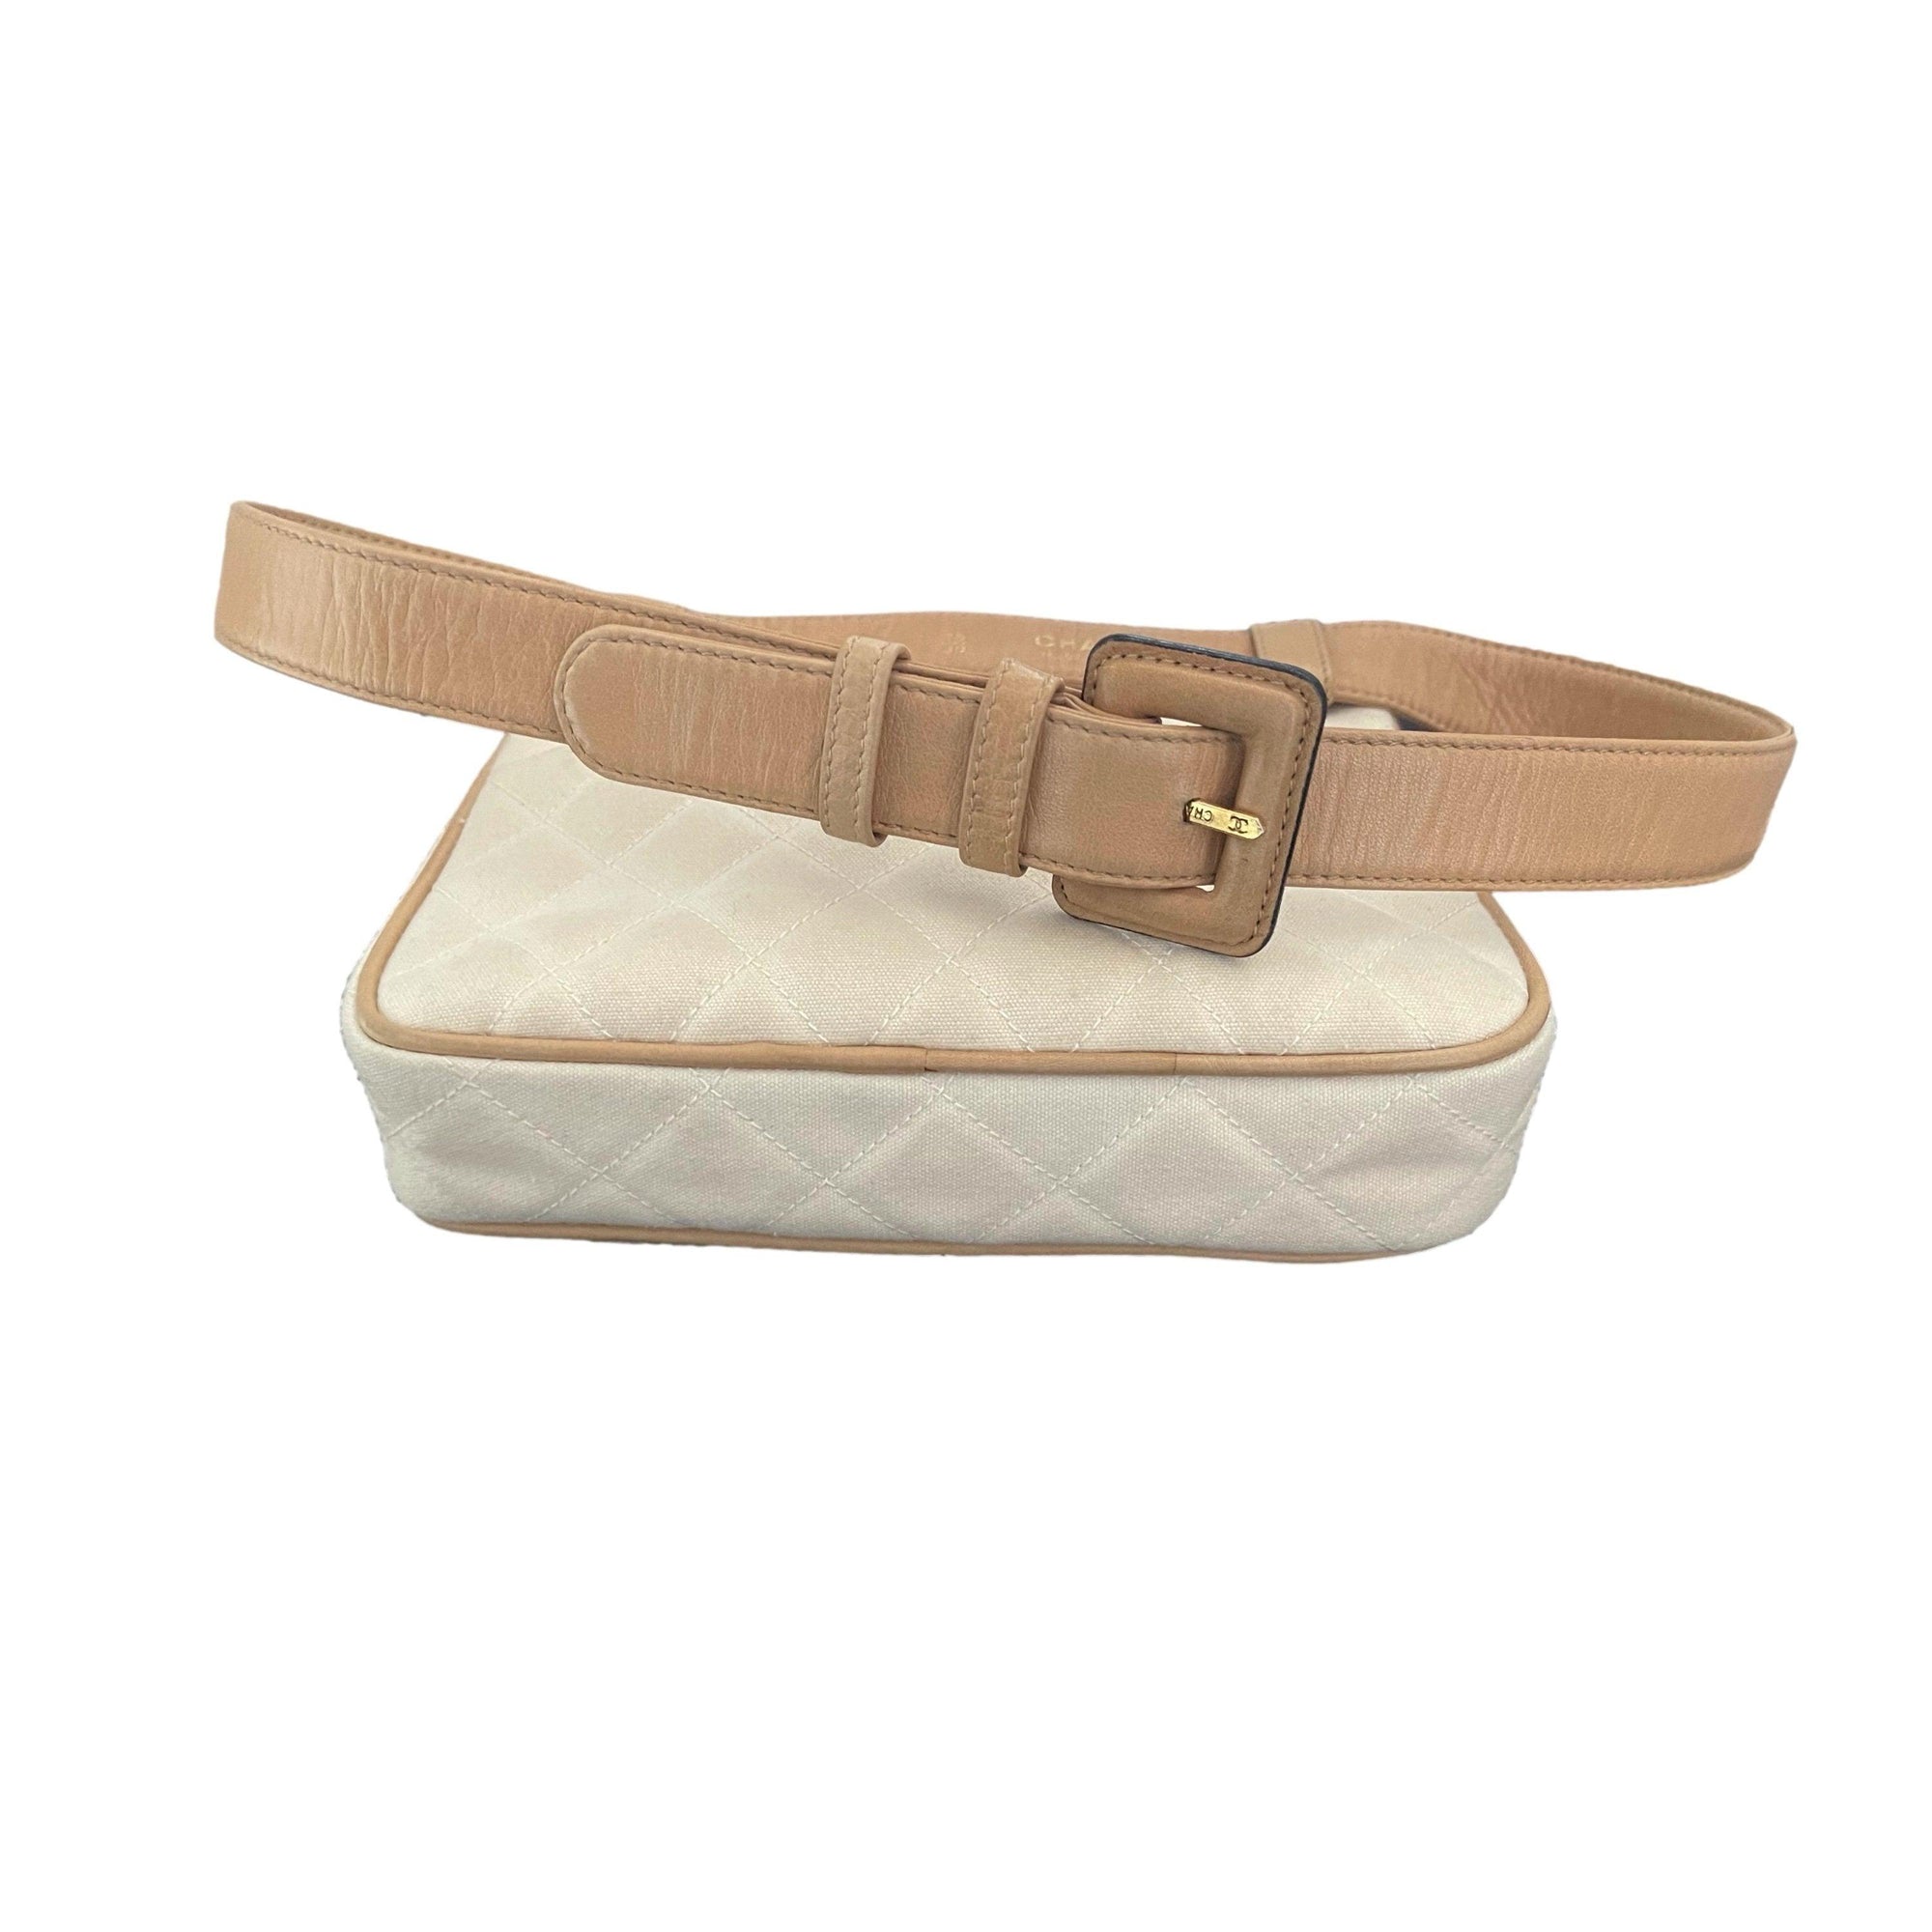 Chanel Cream and Beige Quilted Belt Bag - Handbags